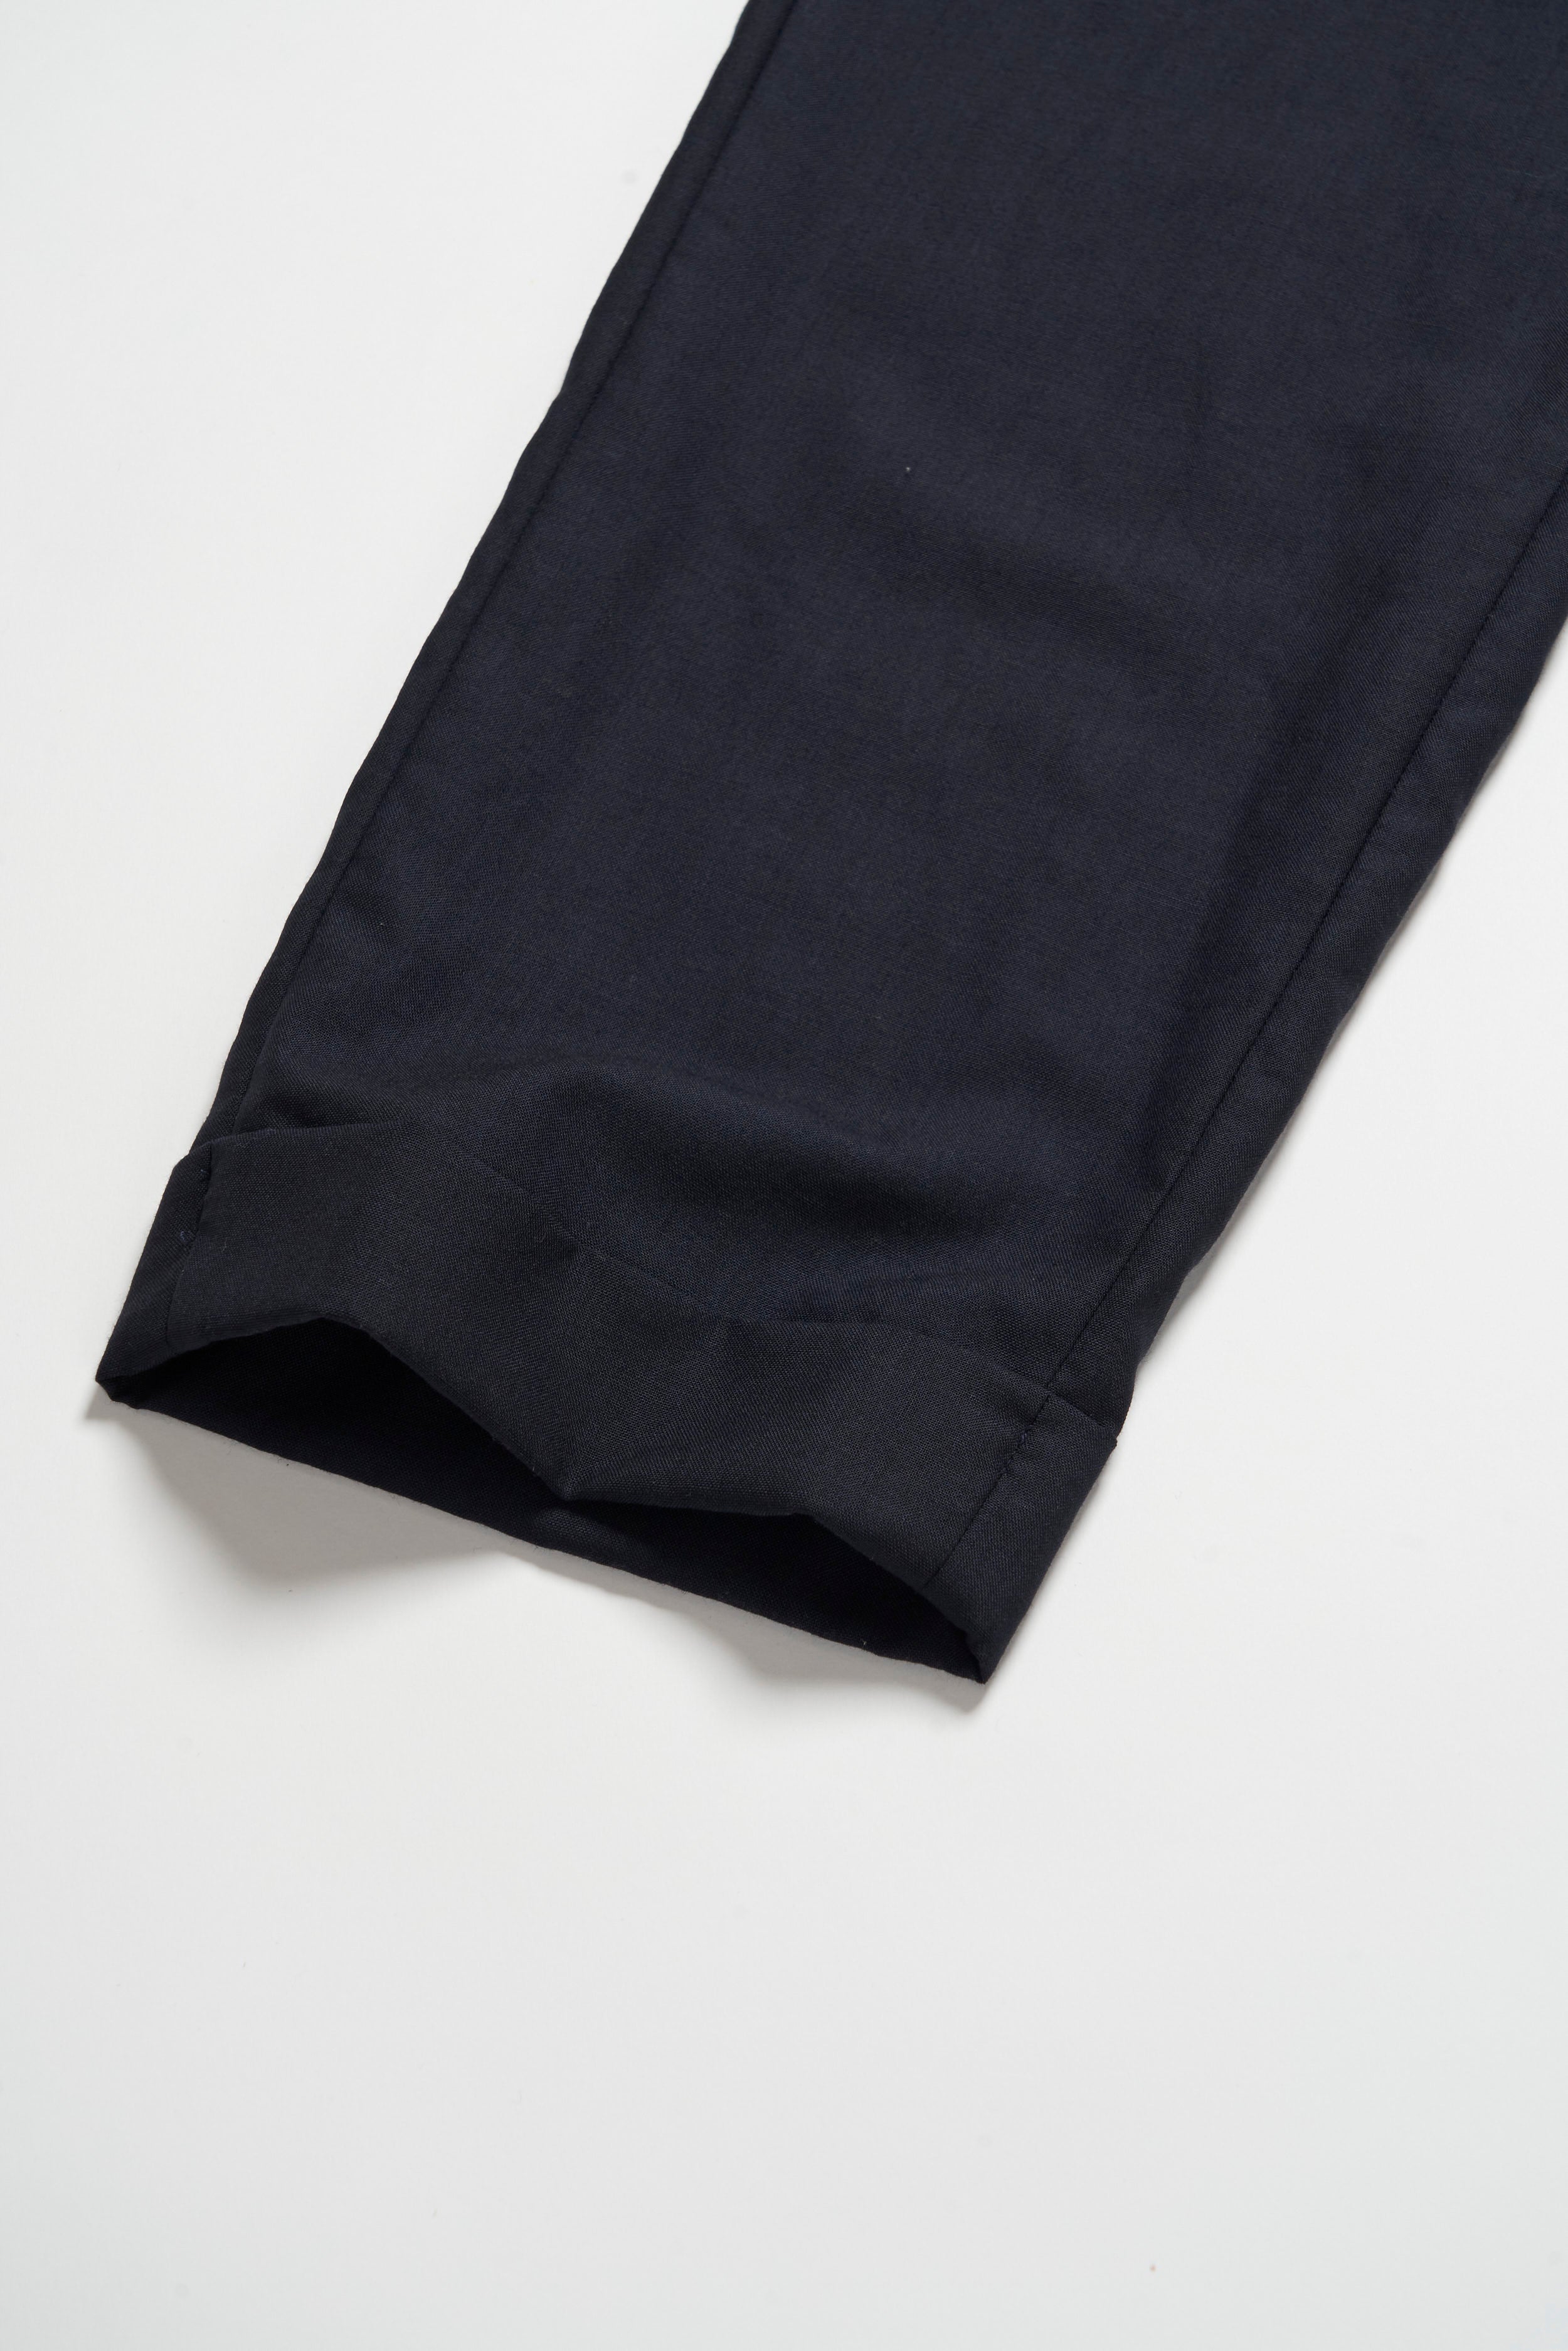 Engineered Garments Andover Pant - Navy Linen Twill